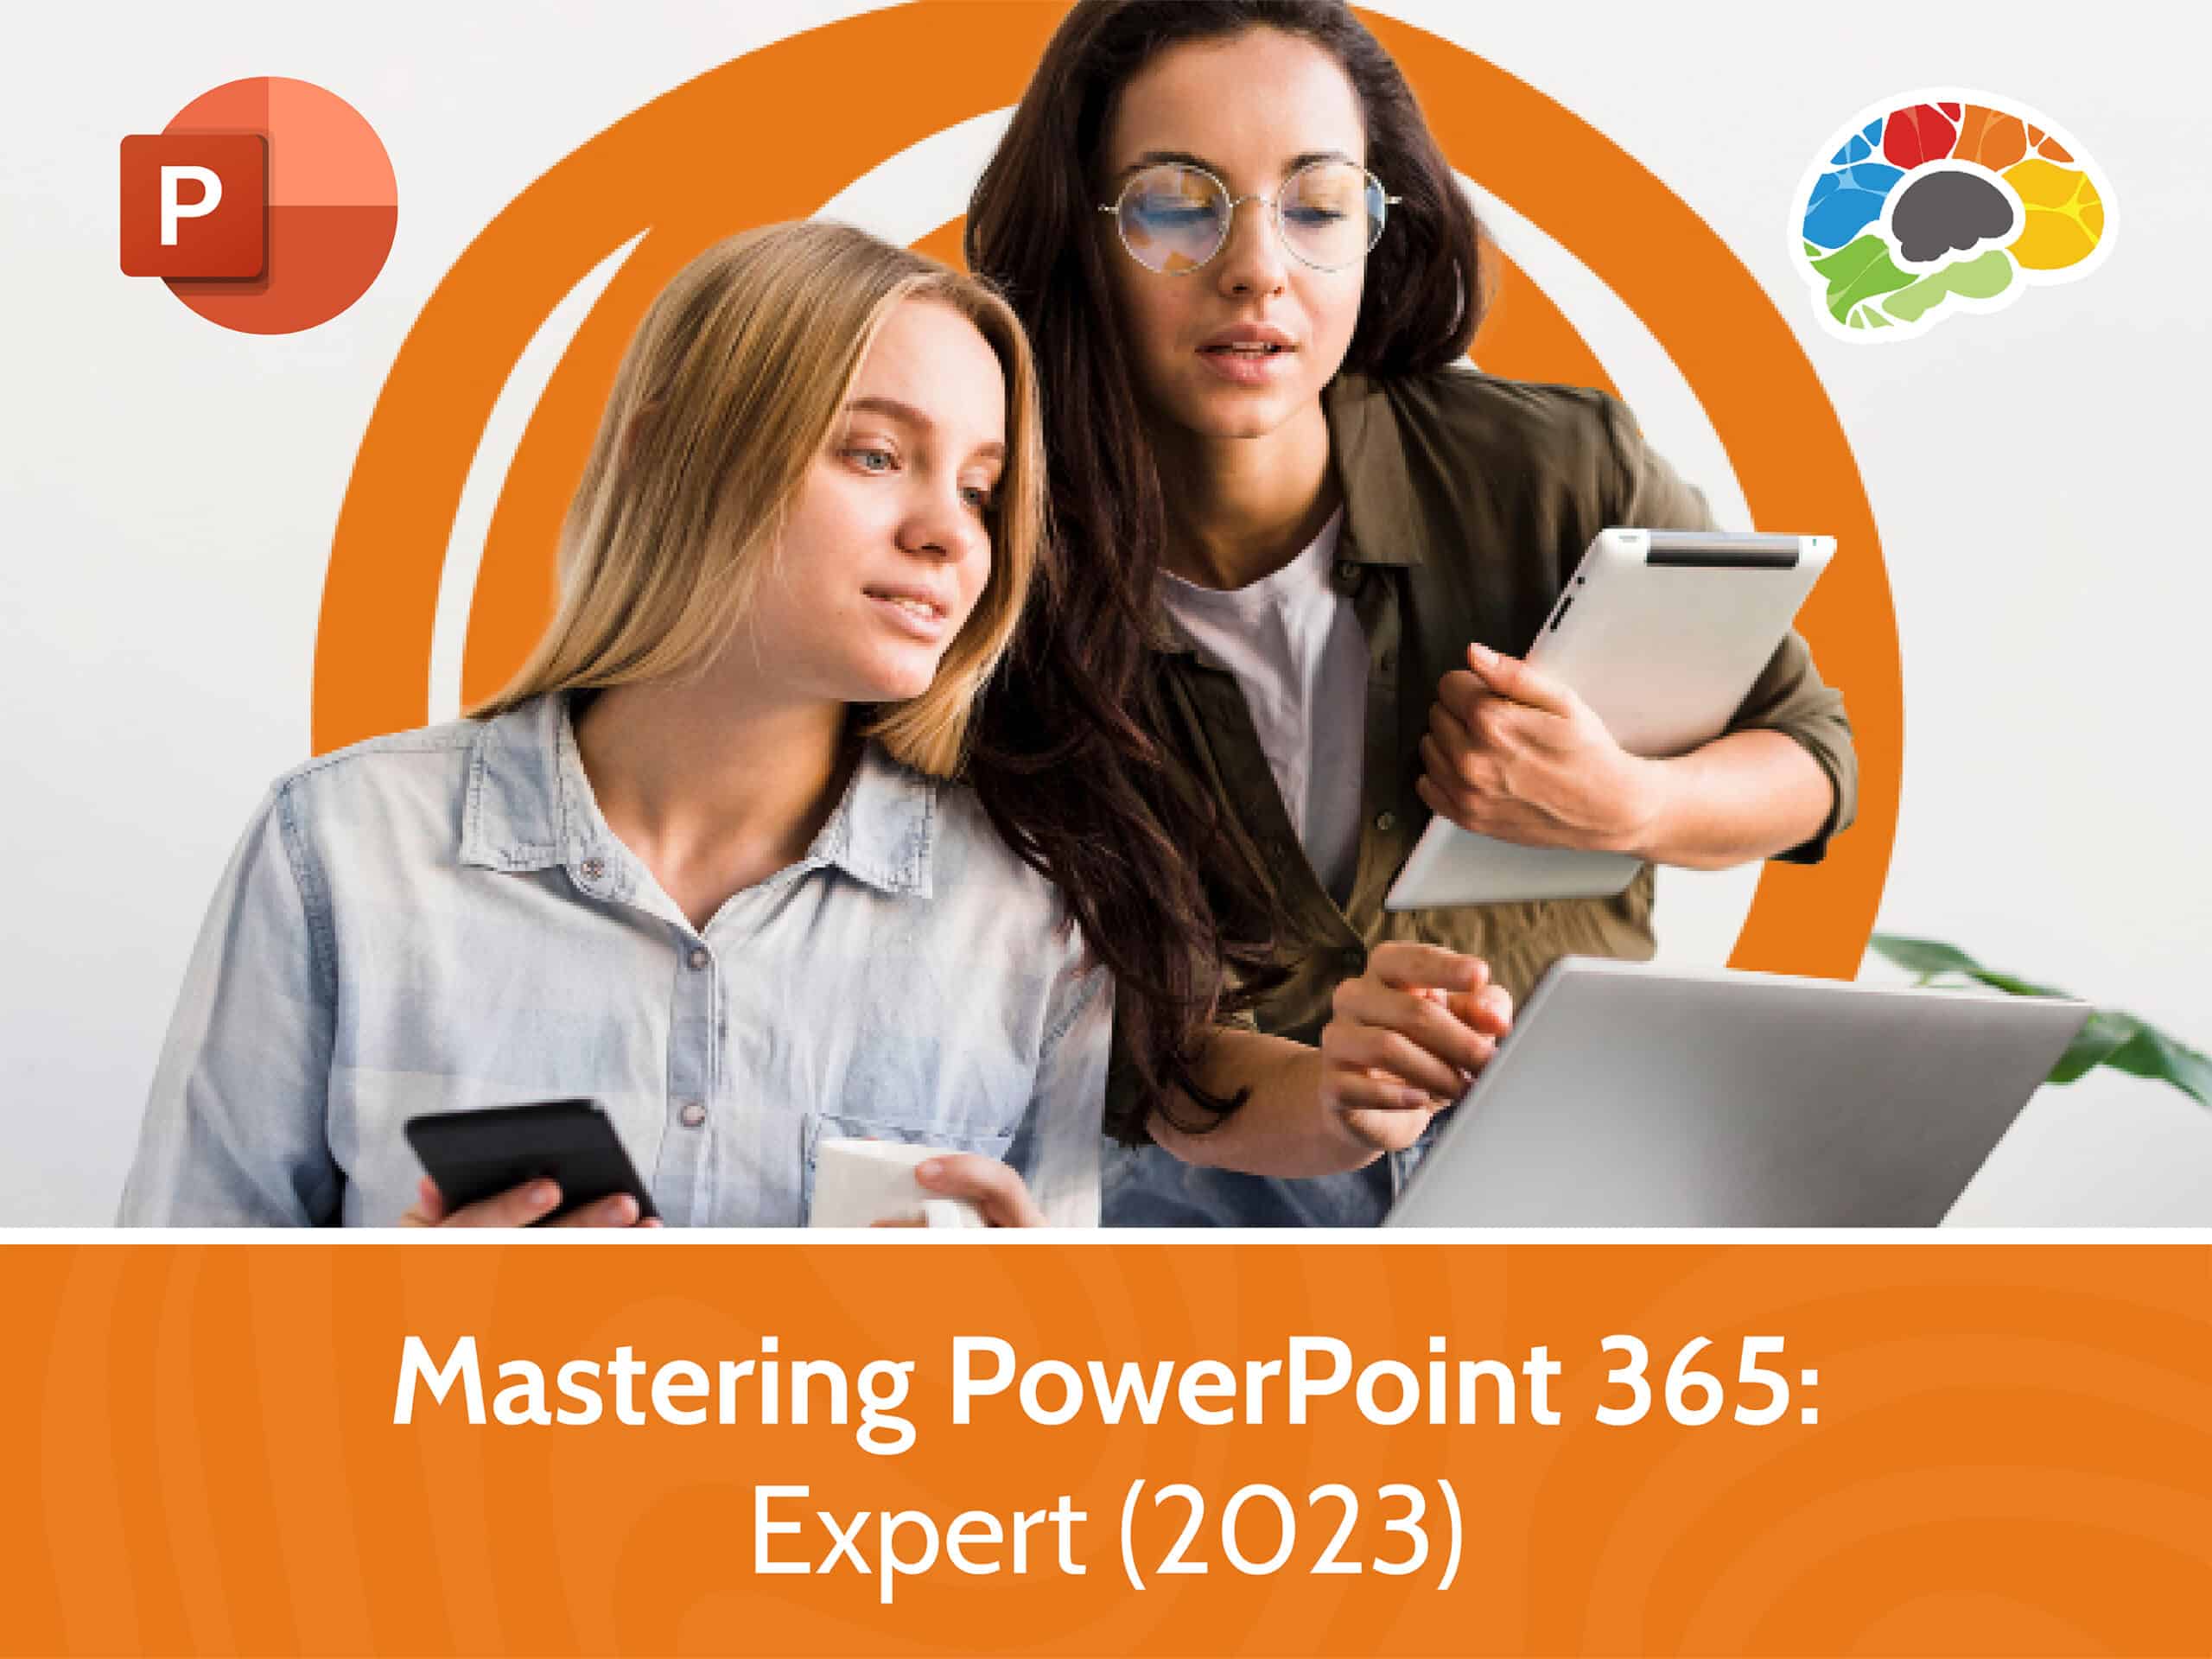 Mastering PowerPoint 365 Expert 2023 scaled